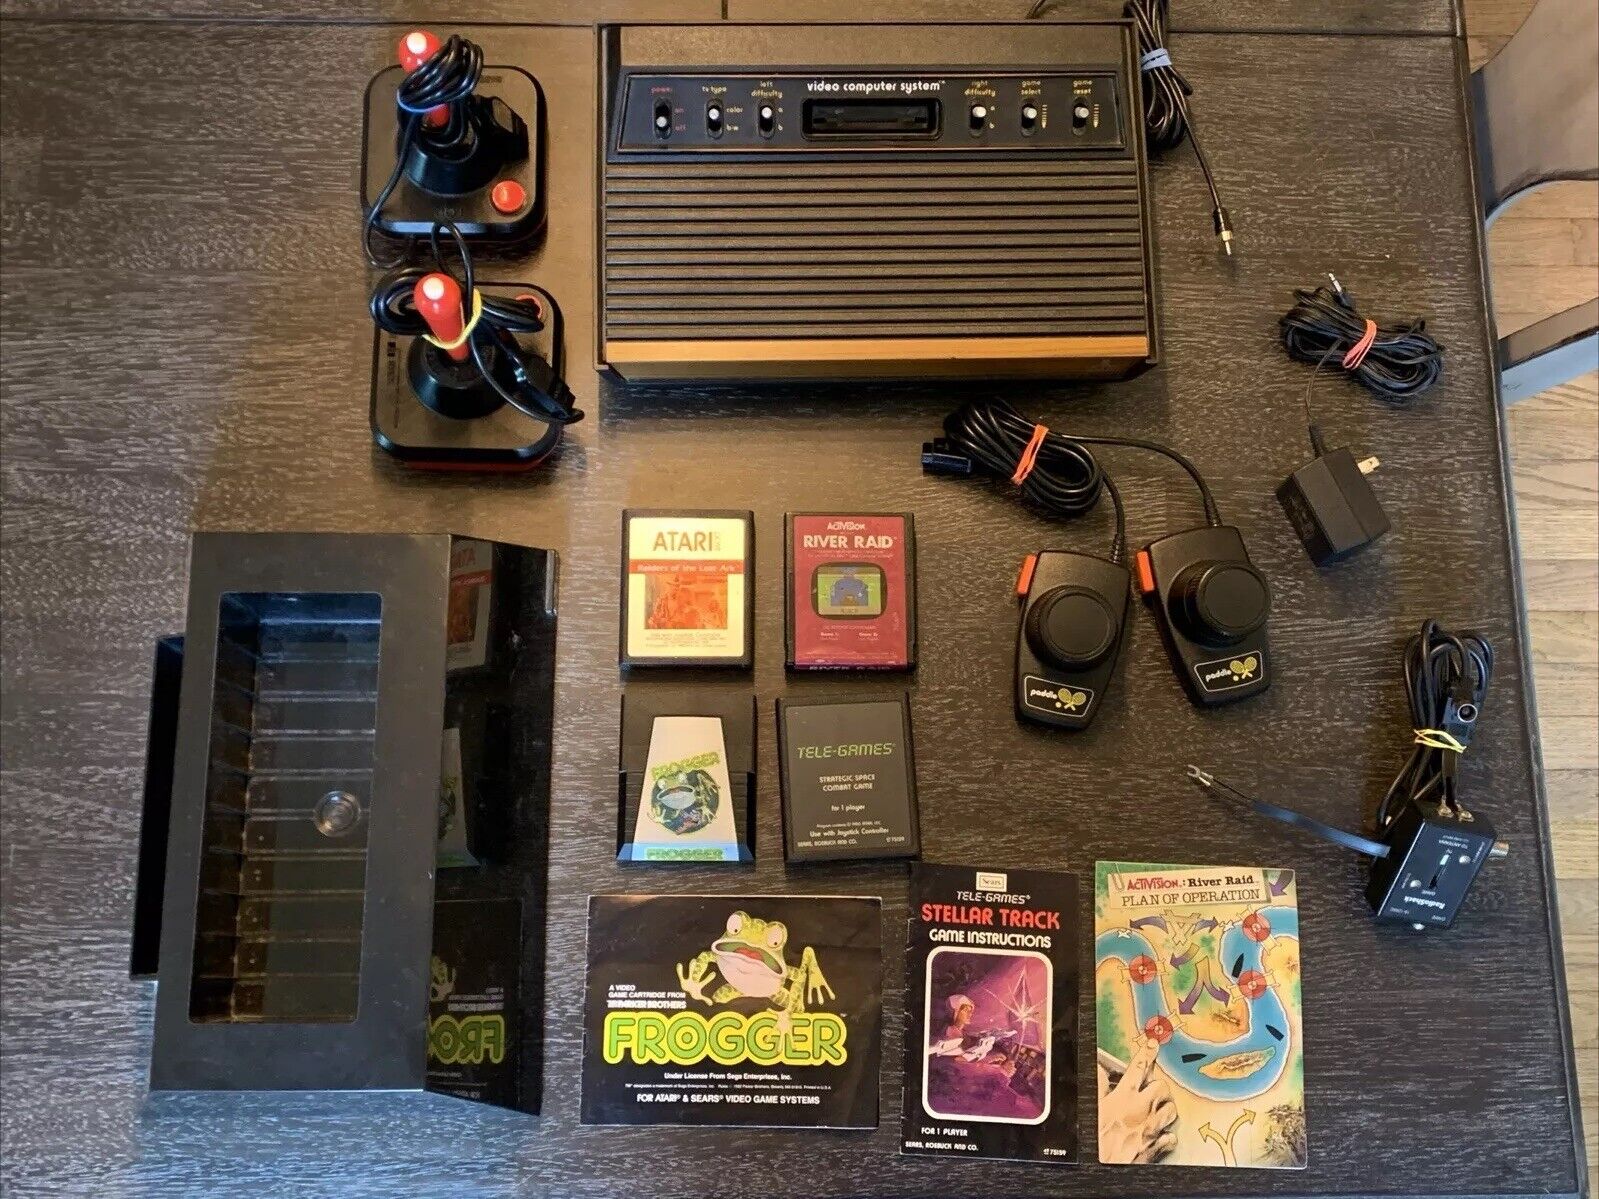 Atari CX2600 video computer system game console controllers 4 games manuals